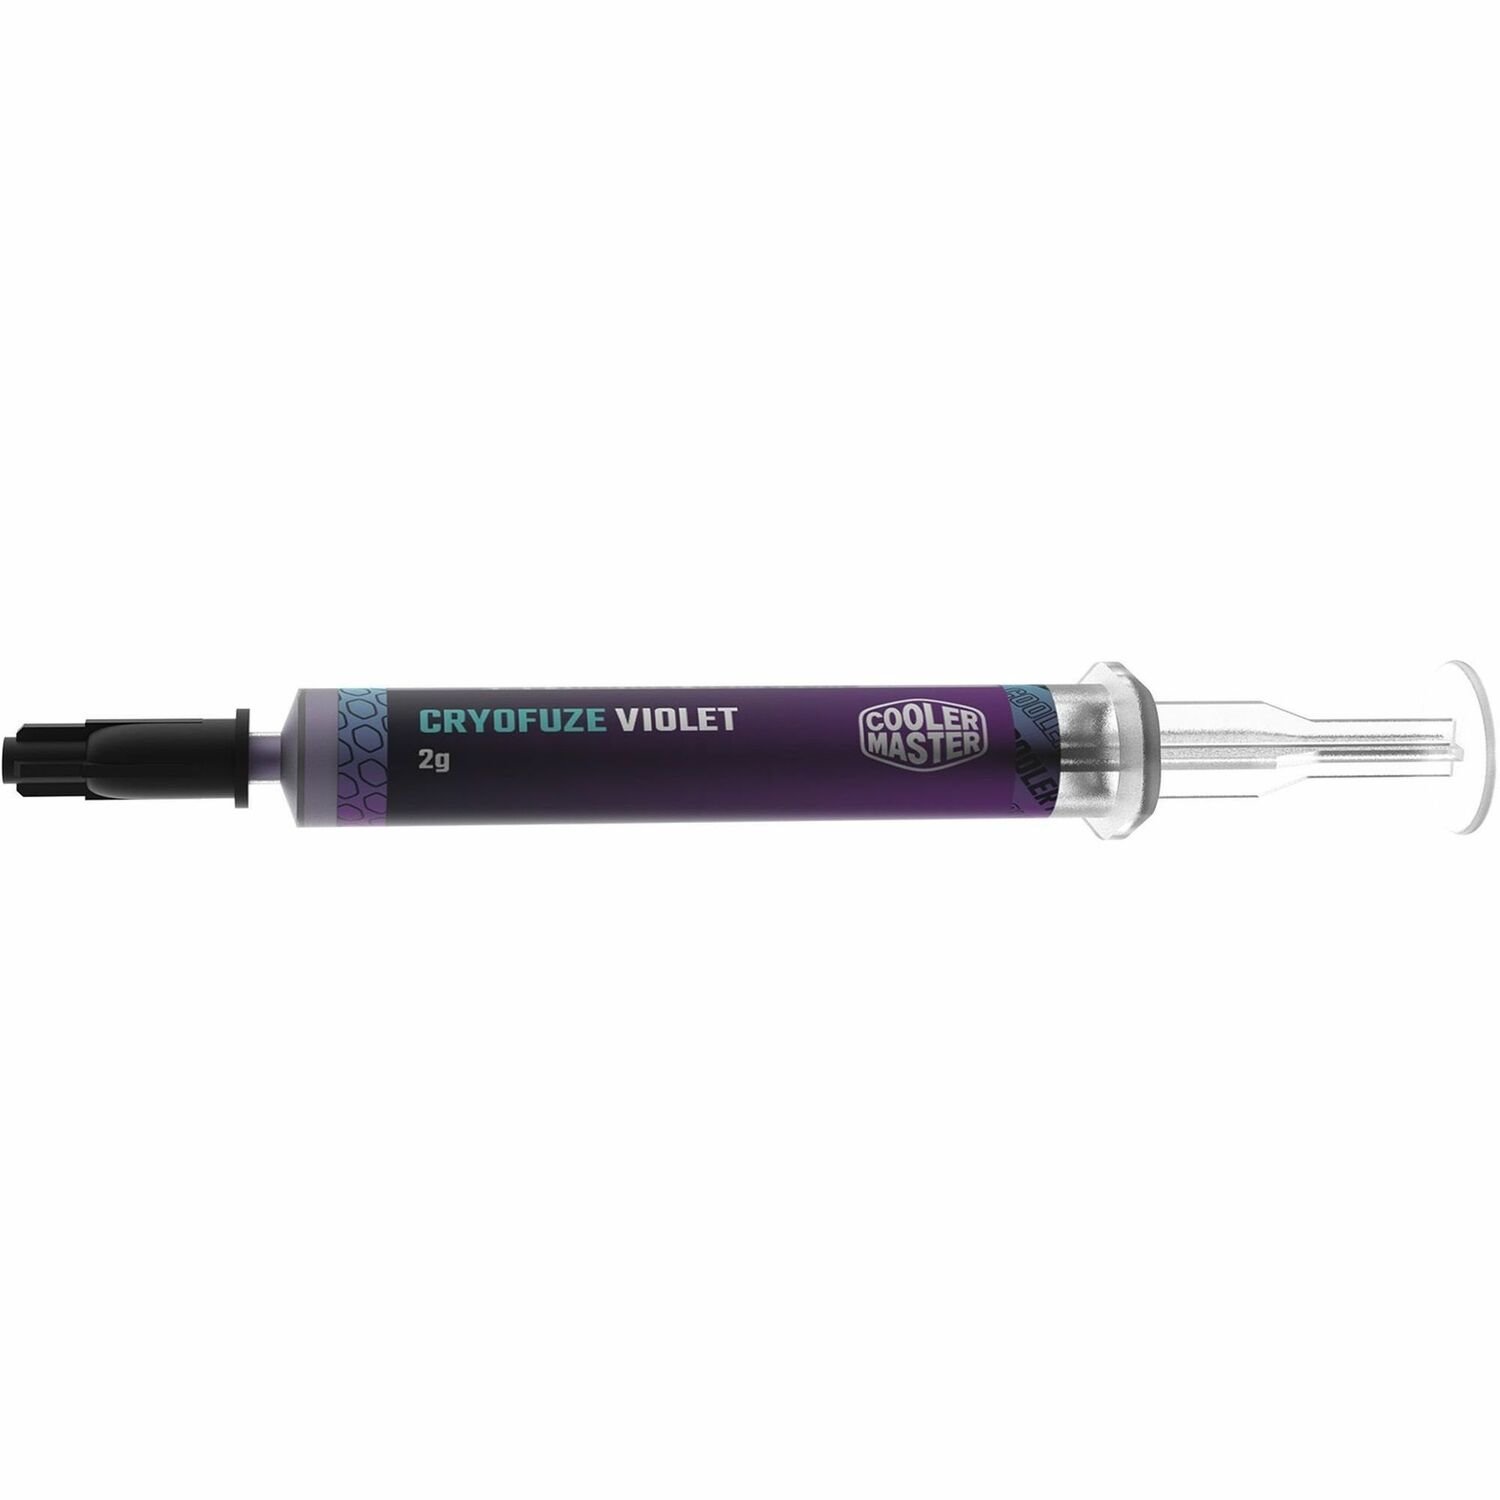 Cooler Master Thermal Grease Cryofuze